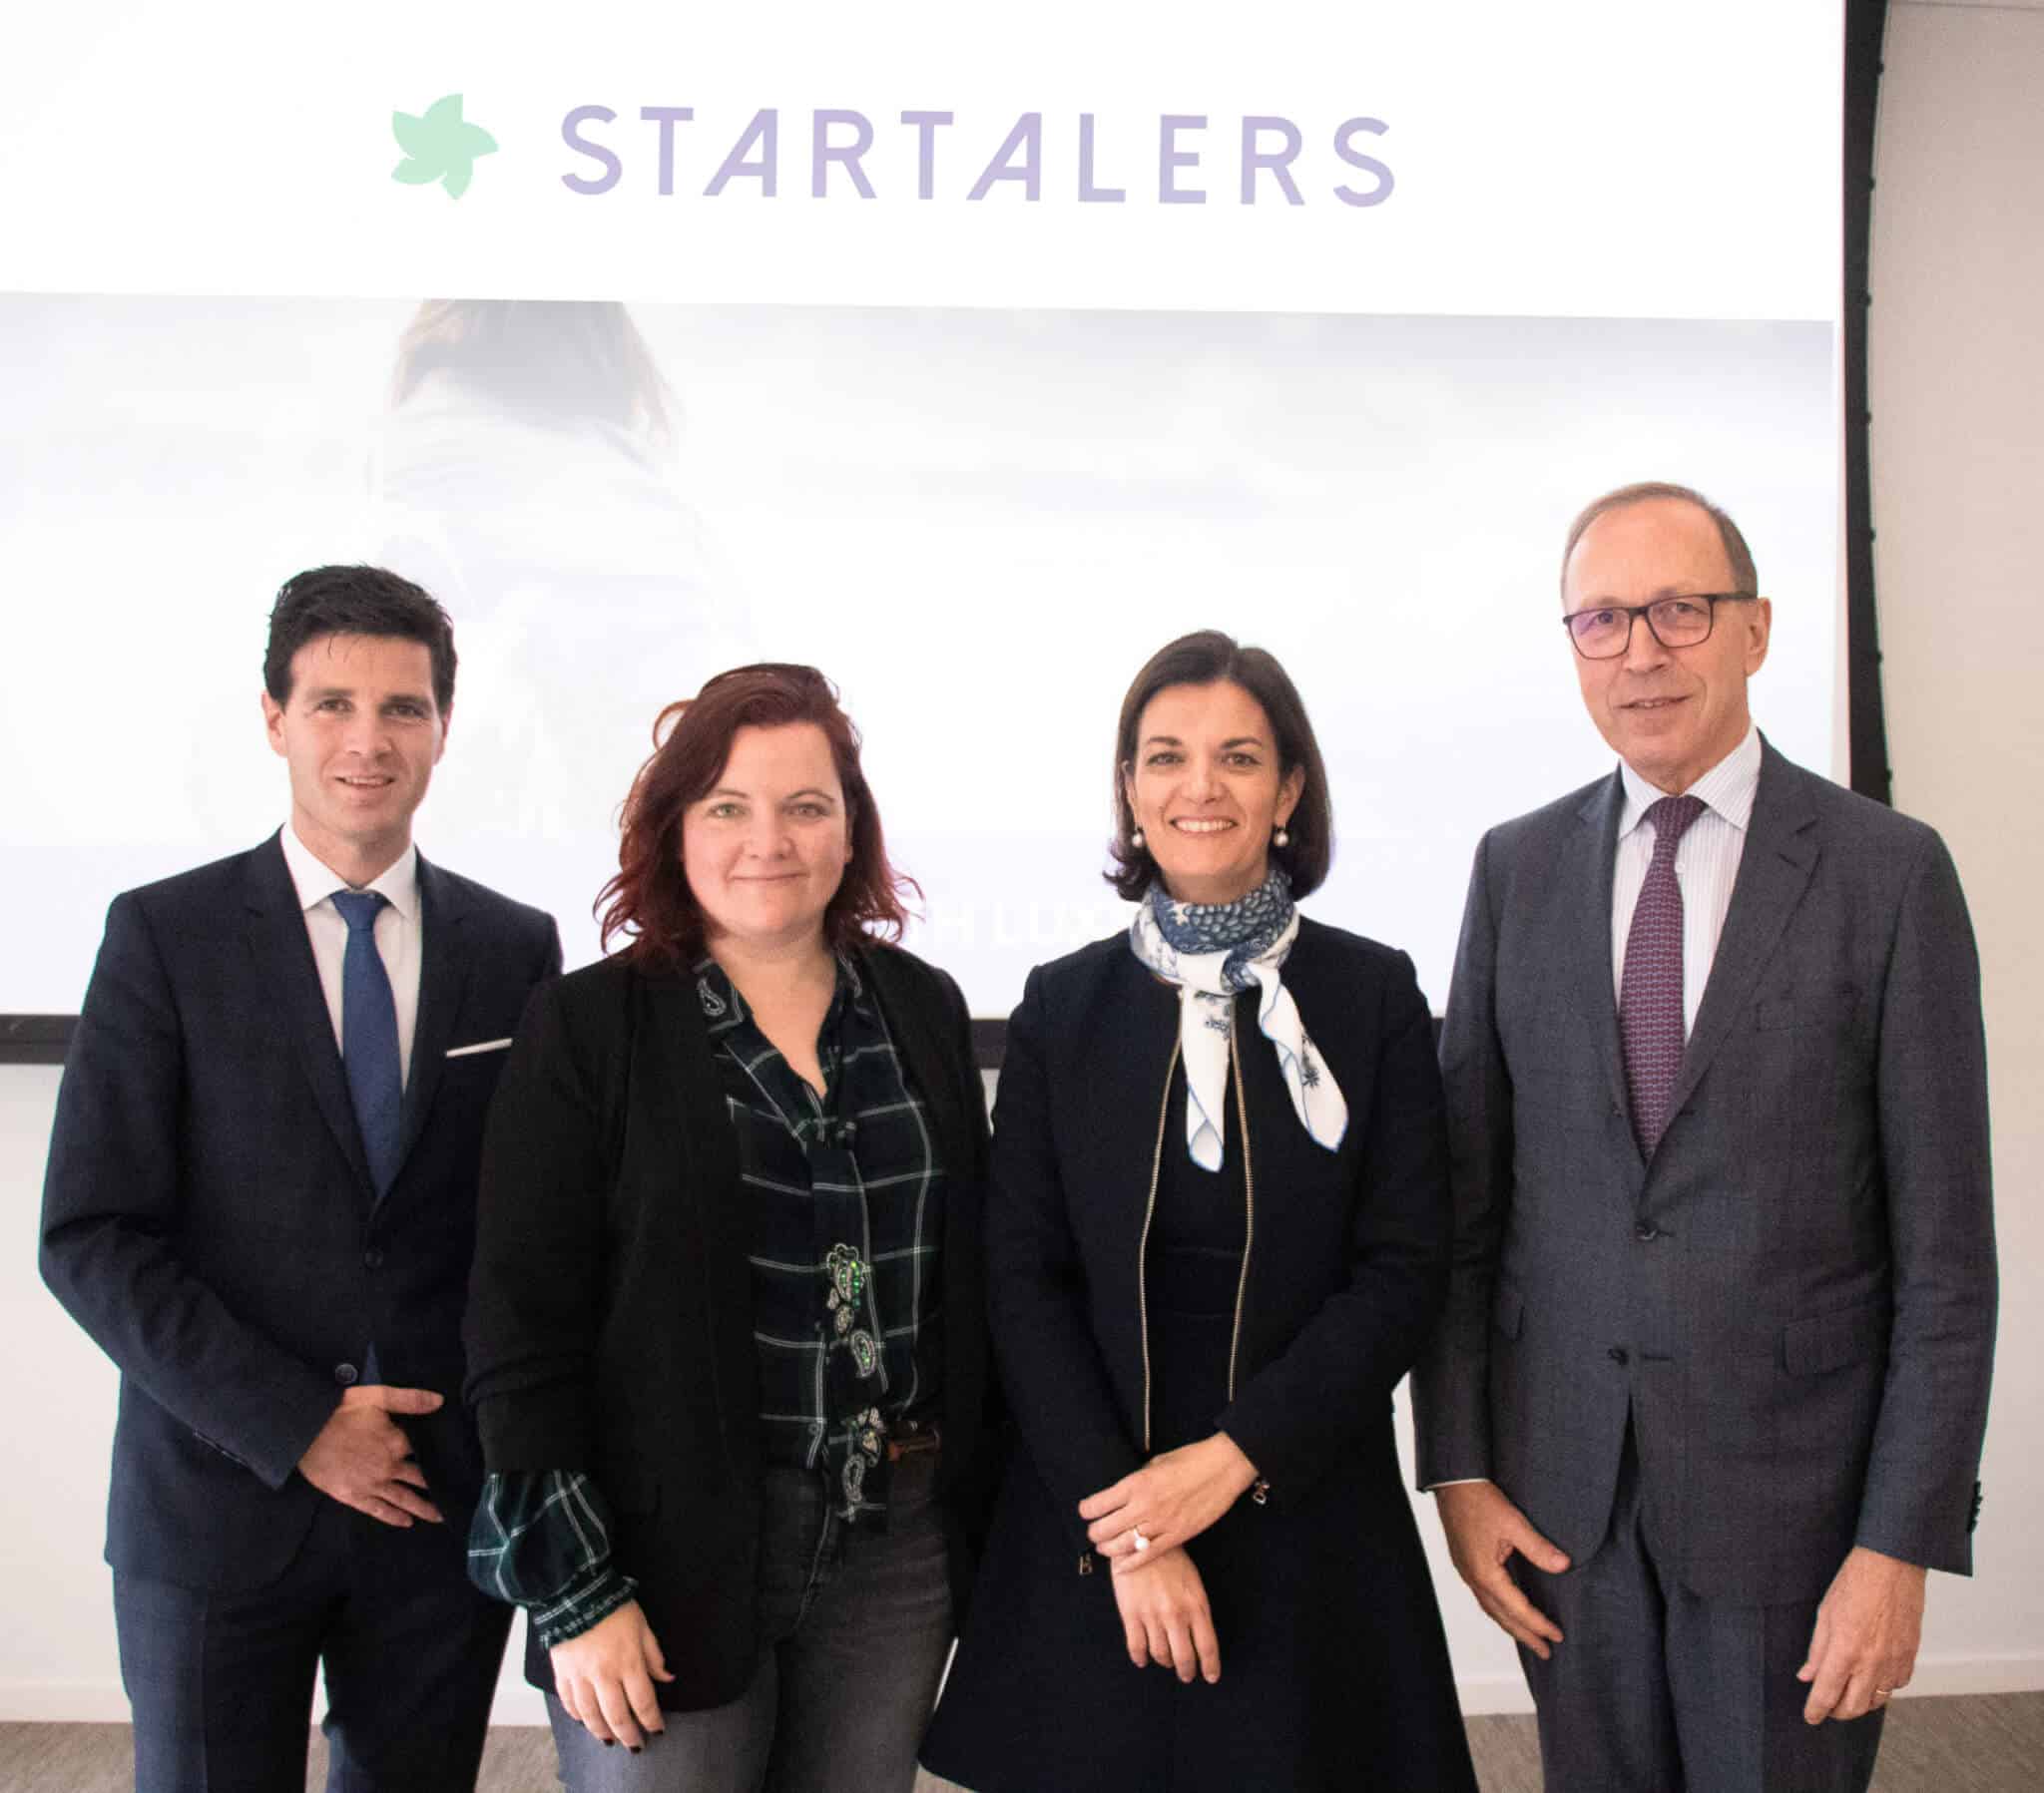 From left to right: Pierre Schoonbroodt, CFO and Member of the Executive Committee of LuxSE, Gaëlle Haag, CEO of StarTalers, Julie Becker, founder of Luxembourg Green Exchange and Member of the Executive Committee of LuxSE, and Robert Scharfe, CEO of LuxSE